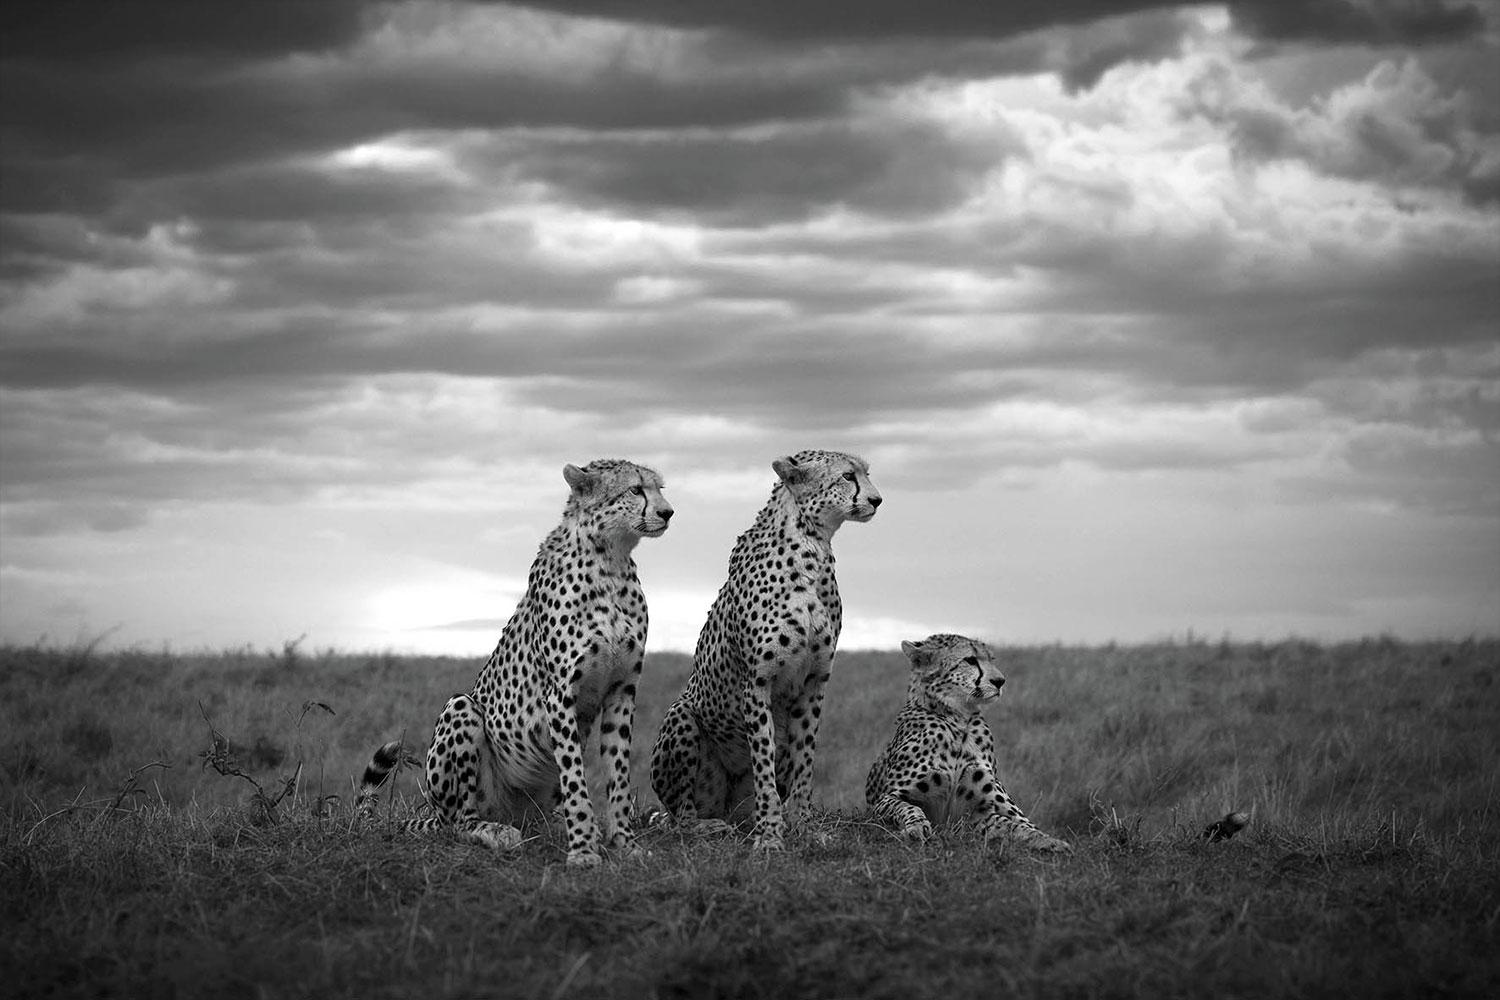 Björn Persson Black and White Photograph – Brothers Masai Mara National Park, Kenia